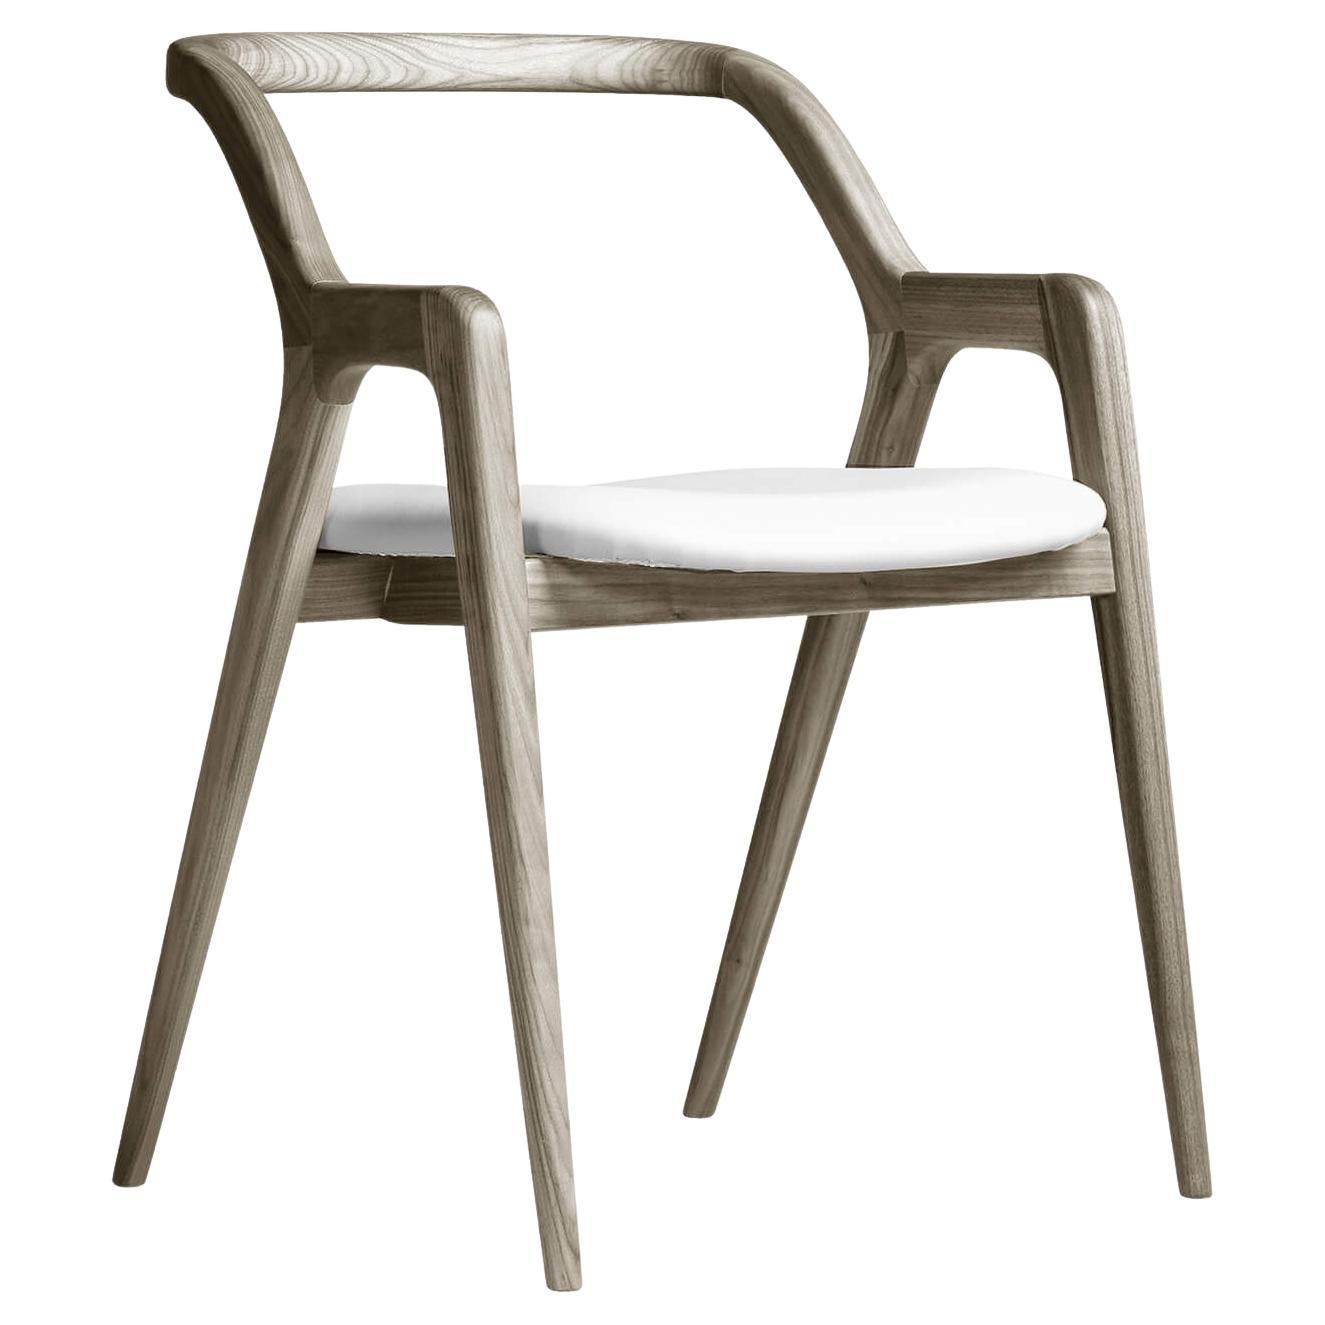 In Breve Chair C-642 by Dale Italia